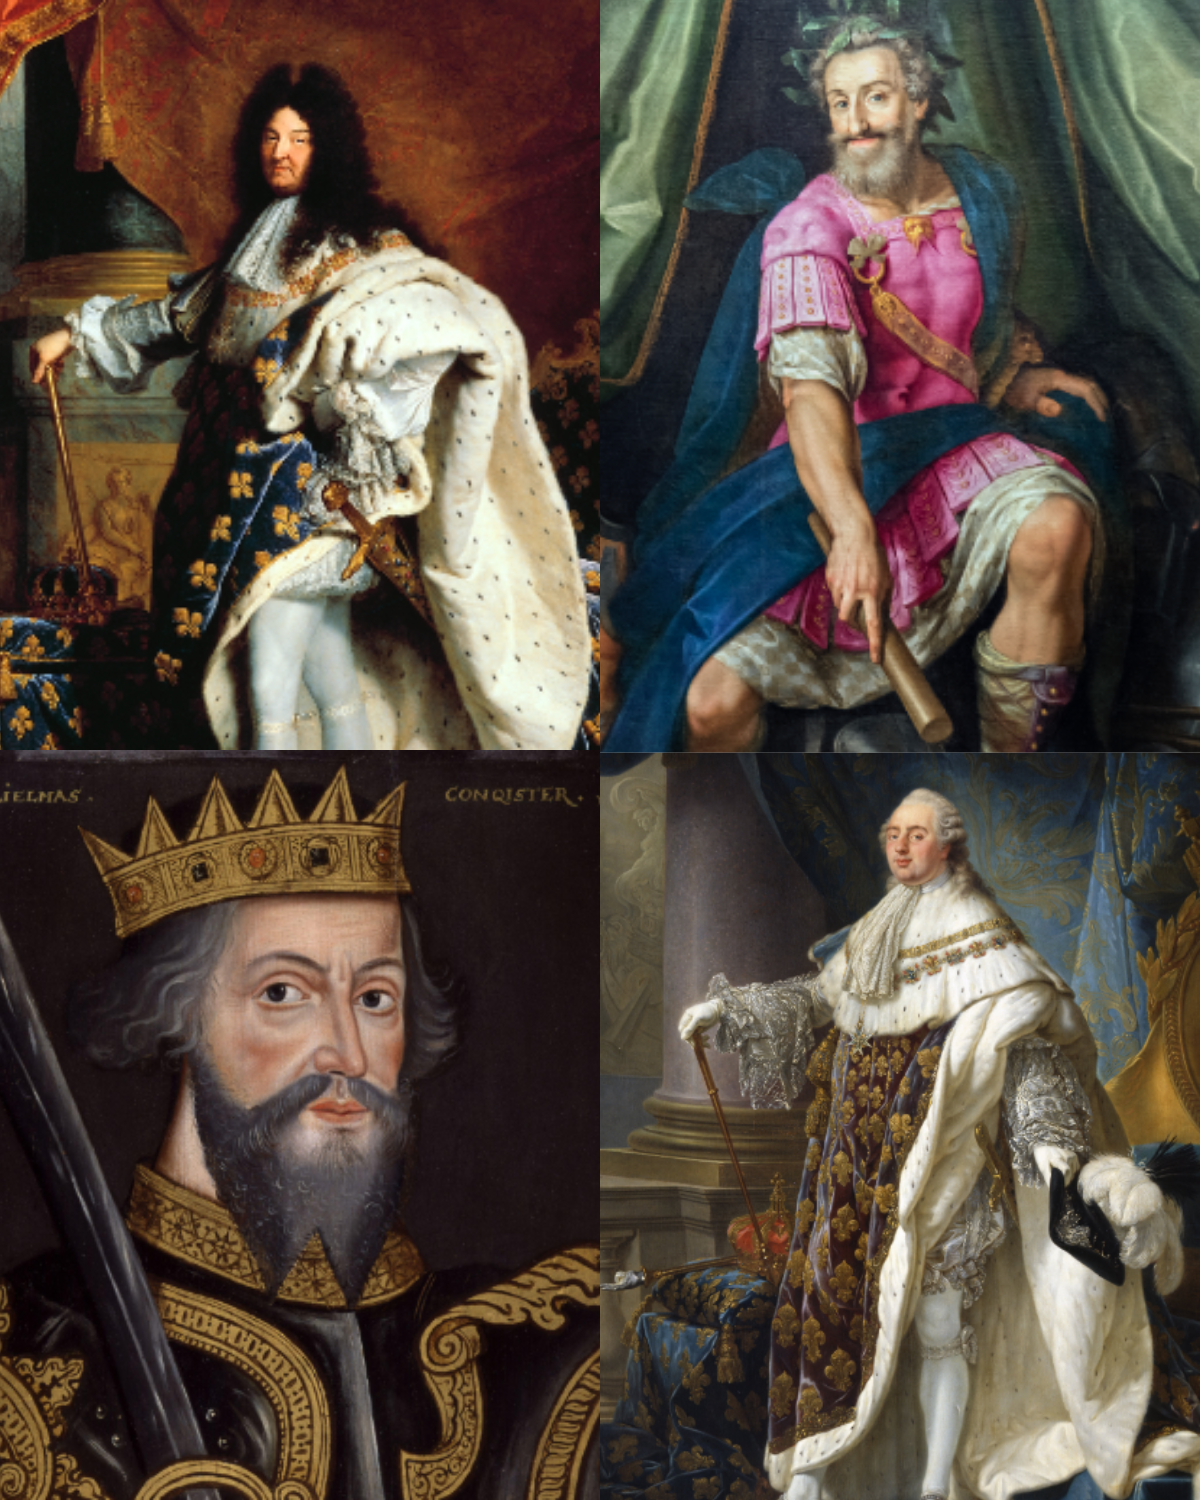 Louis IX, King Of France: What Did He Do & What Is His Legacy